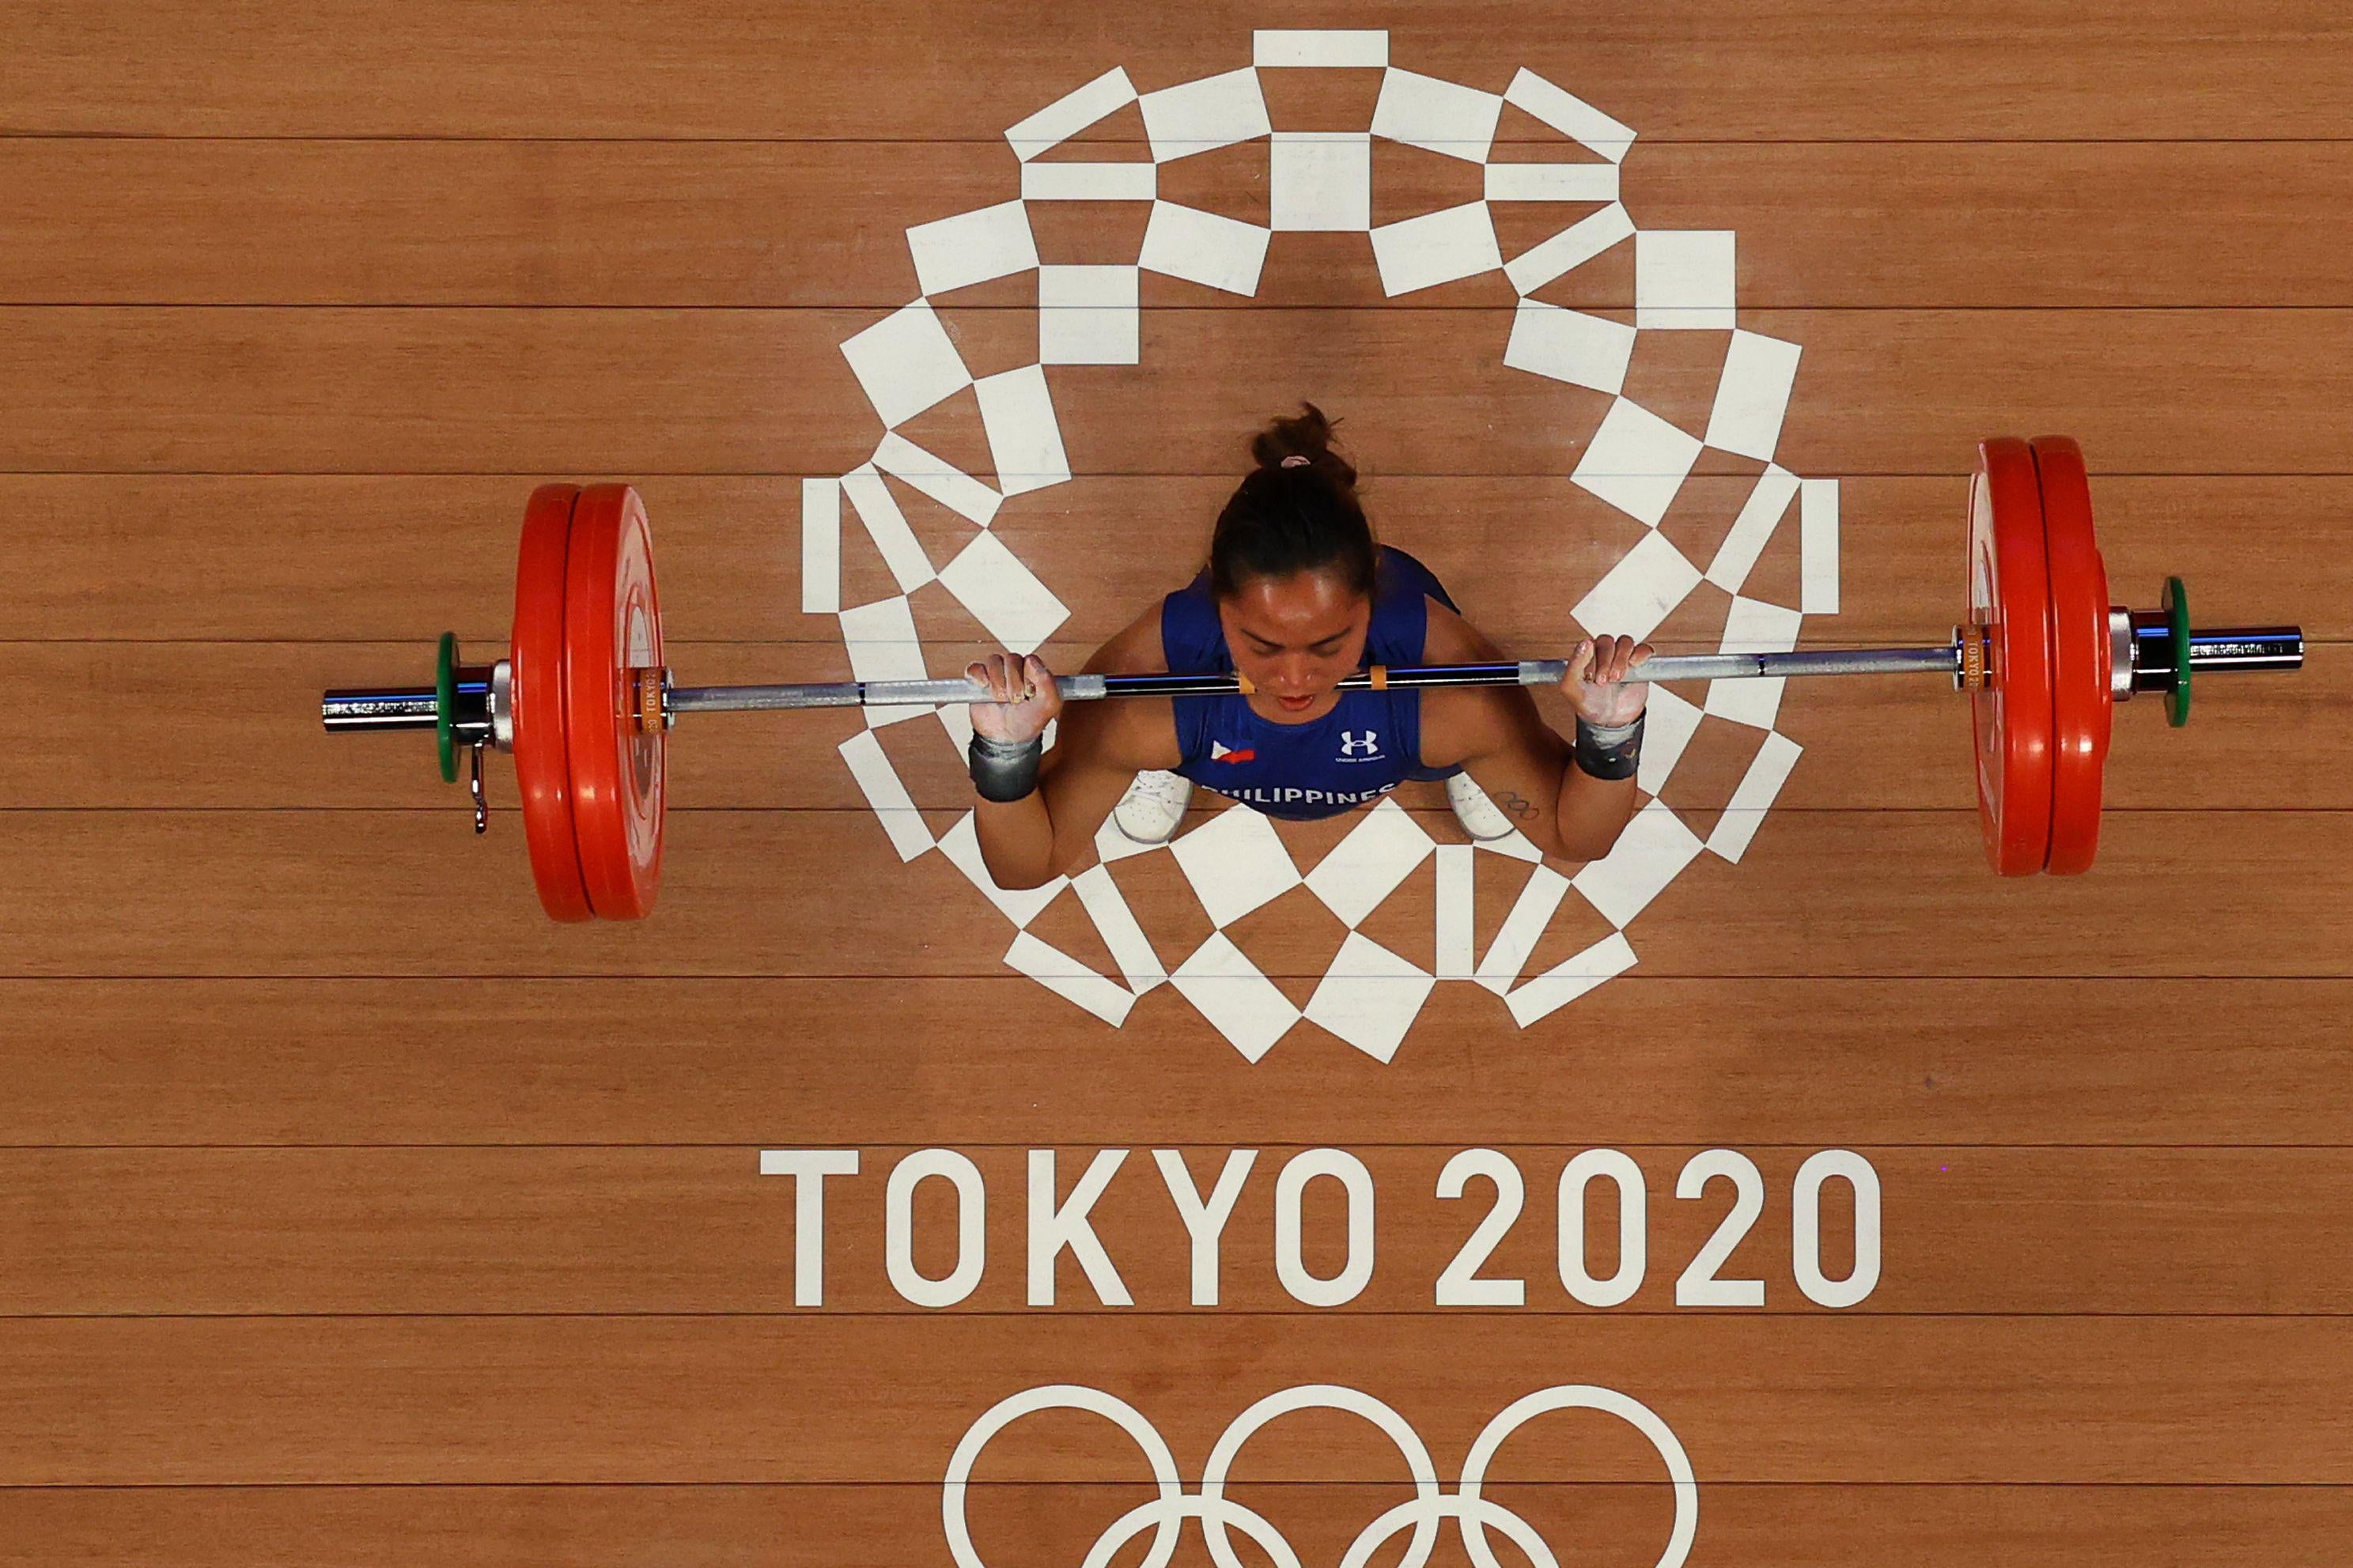 An overview of a female weightlifter midway through a barbell lift, with the Tokyo 2020 Olympics logo underneath her feet.